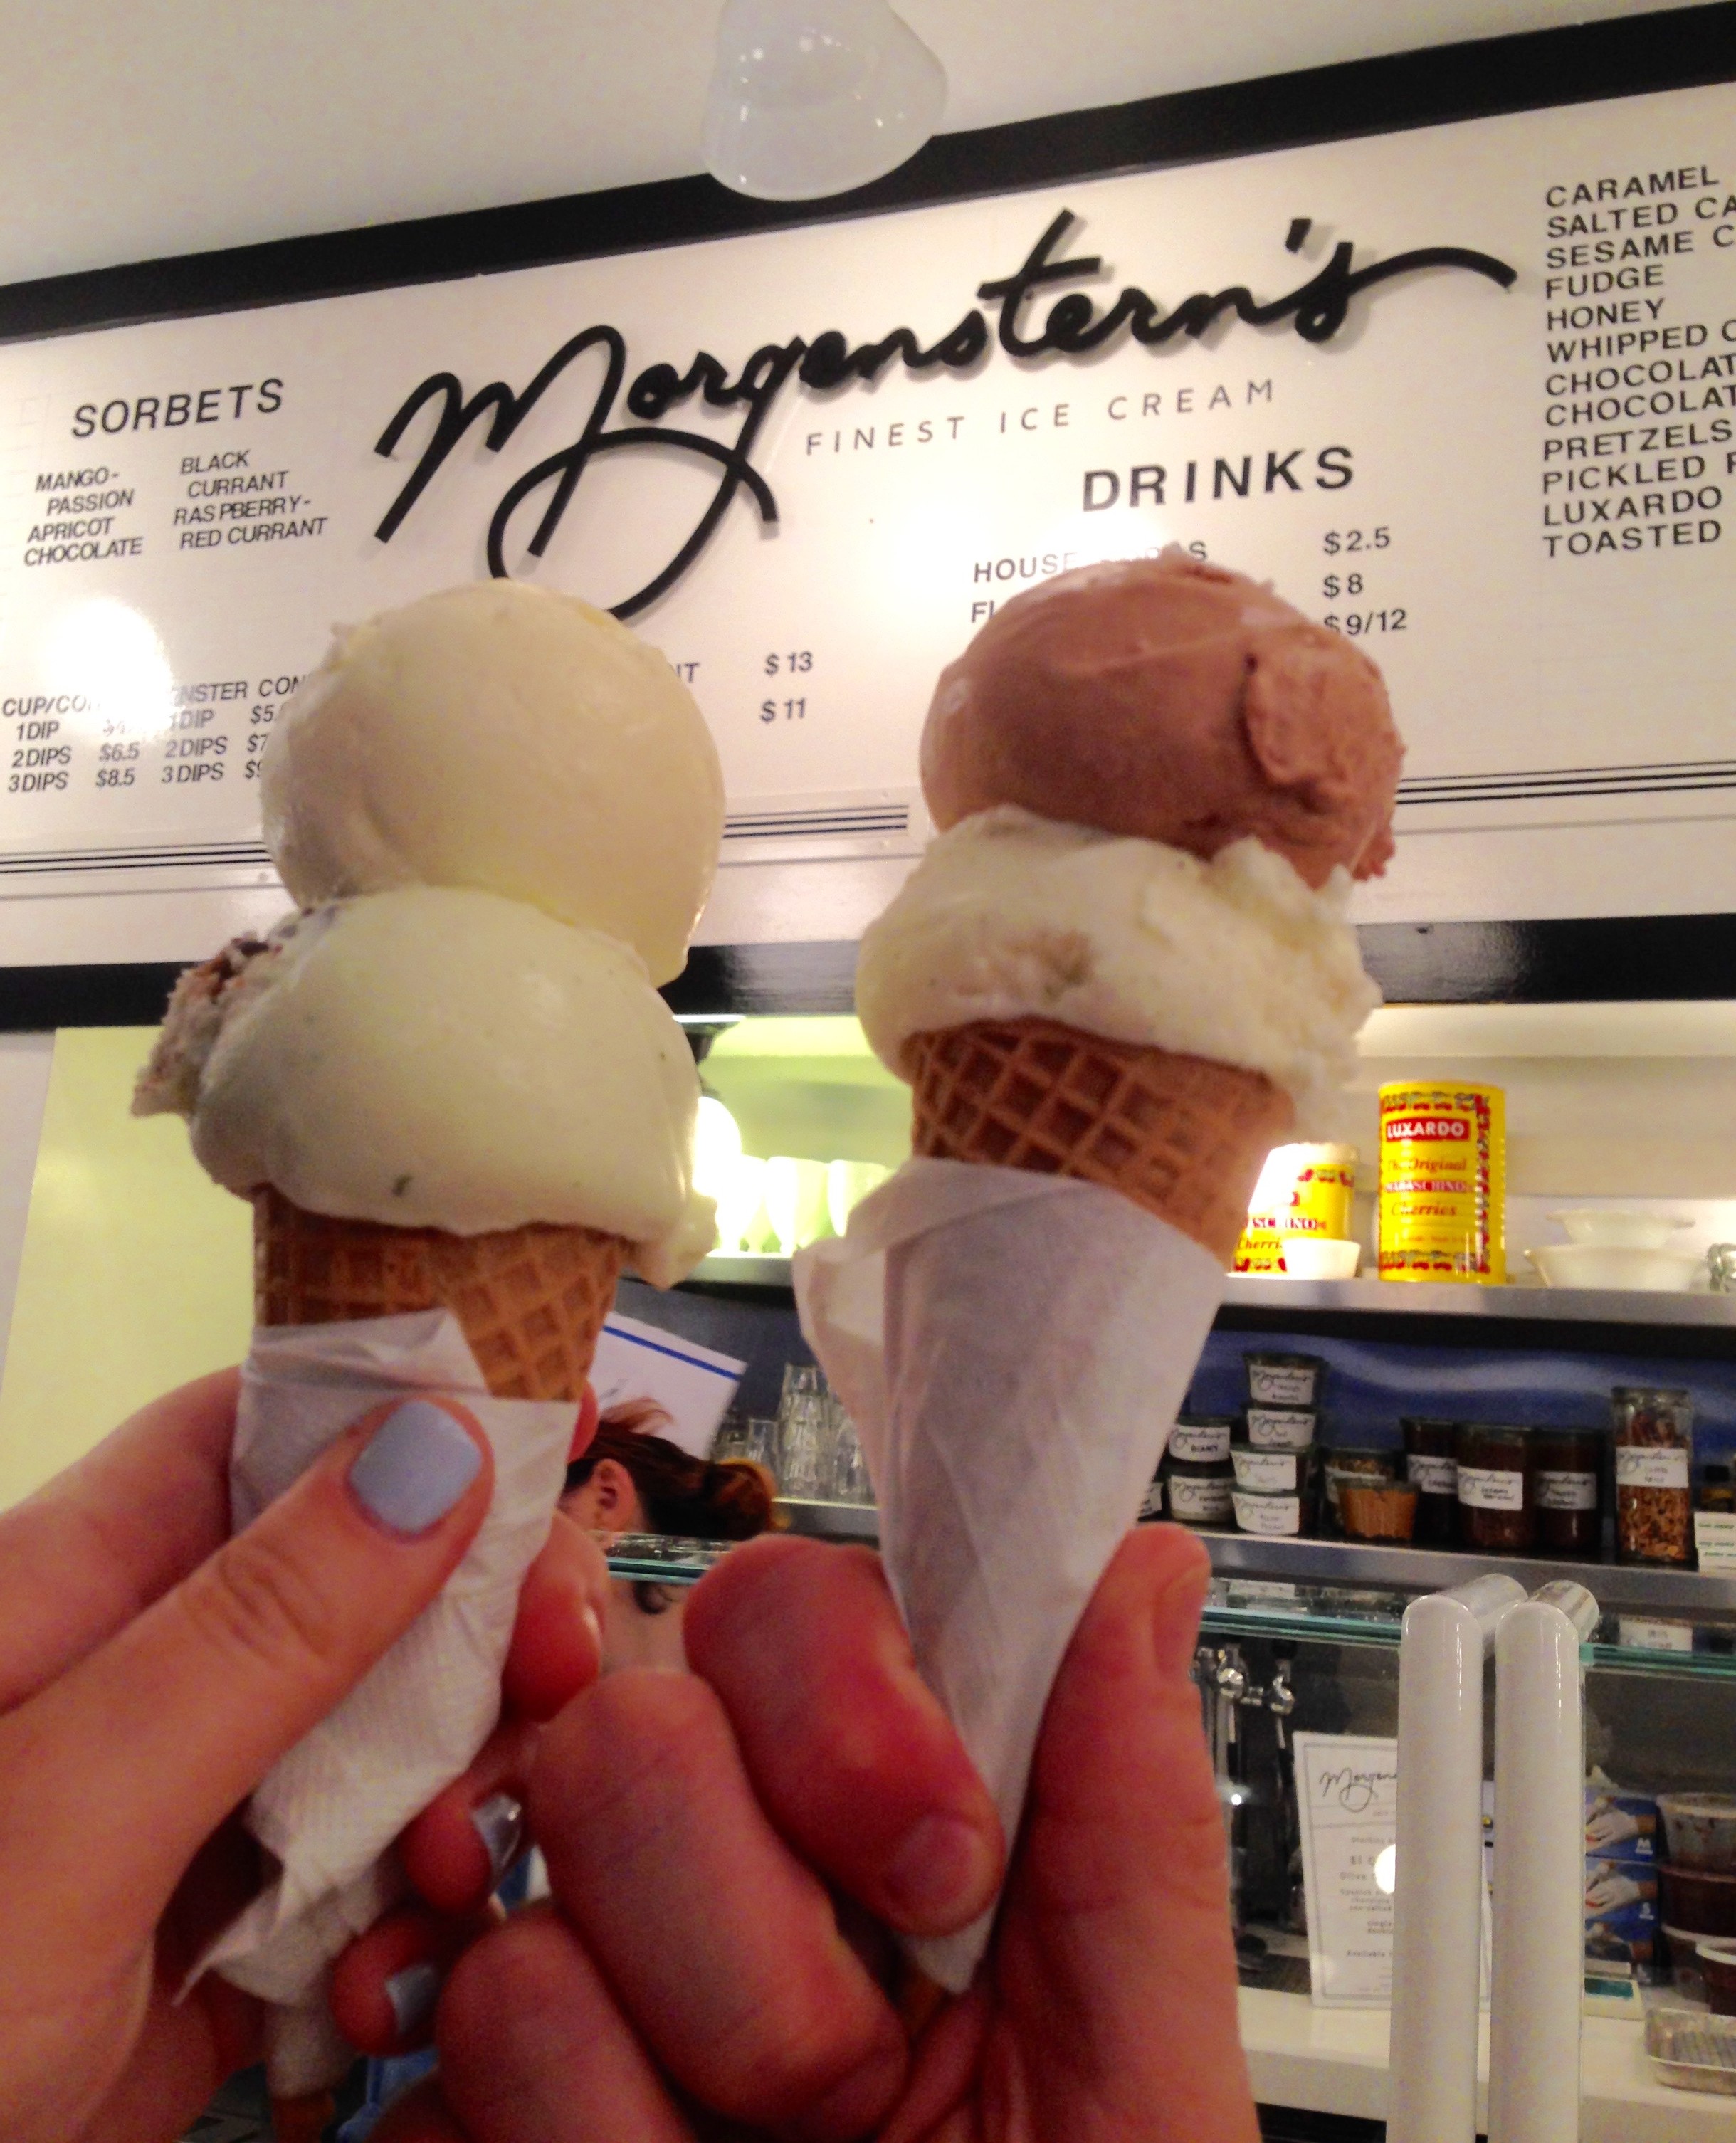 Morgensterns Finest Ice Creamlower East Side Compass Twine 